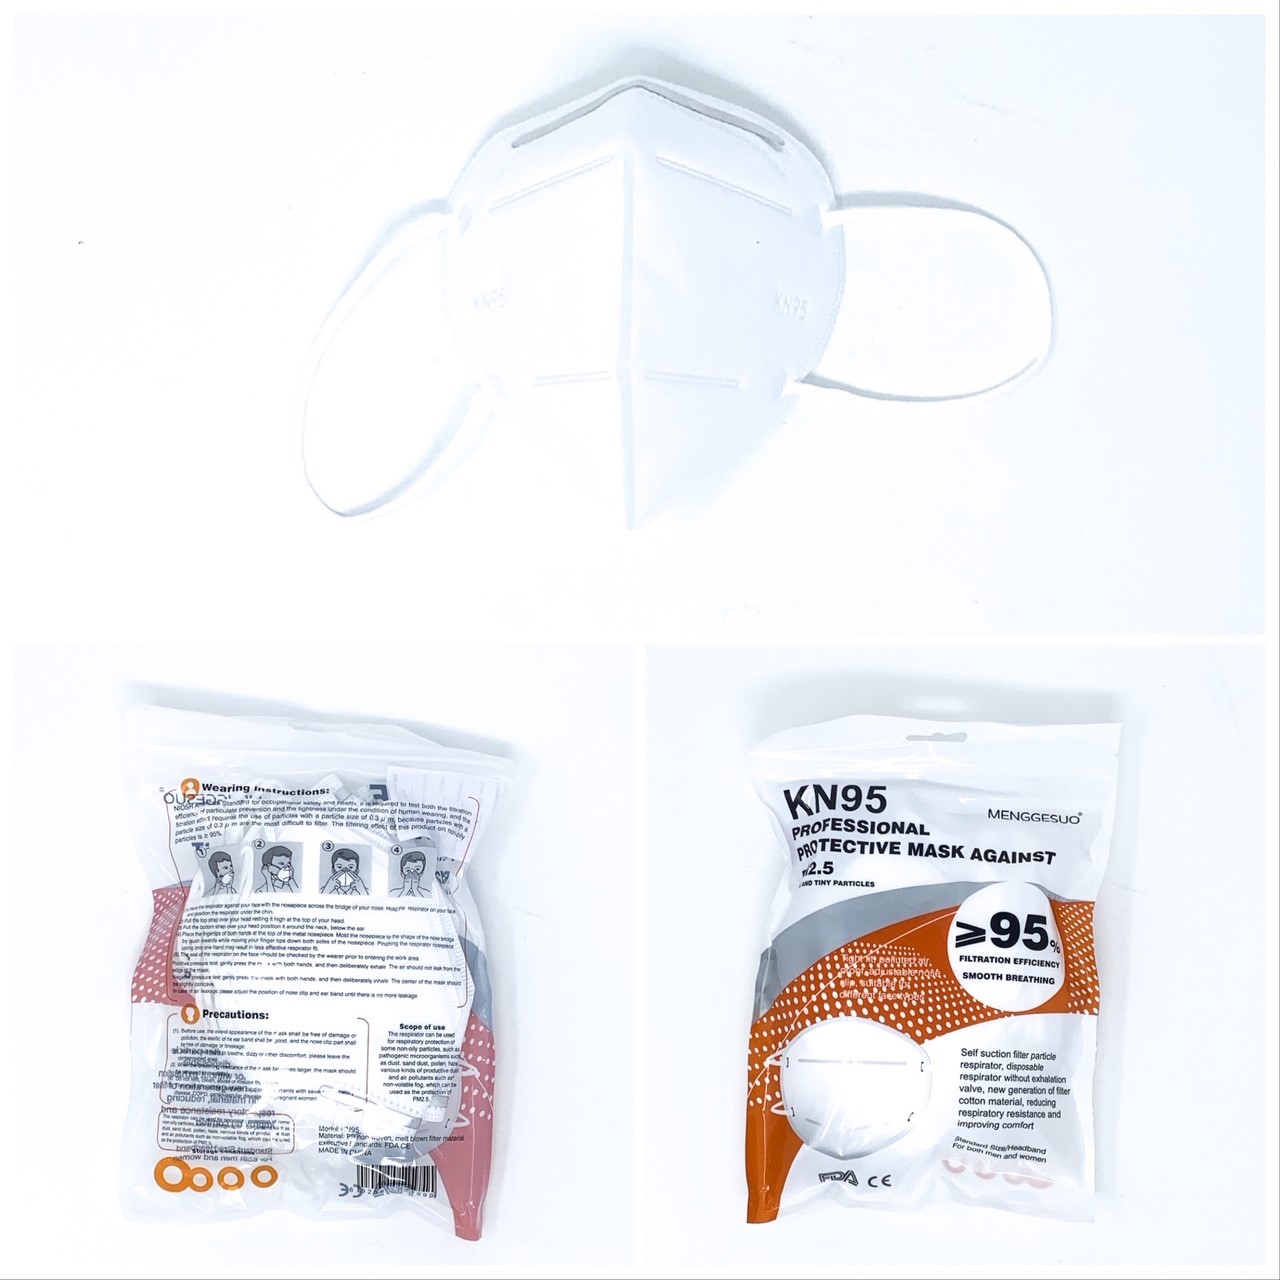 Particulate Respirator / Surgical Mask KN95 Elastic Strap One Size Fit